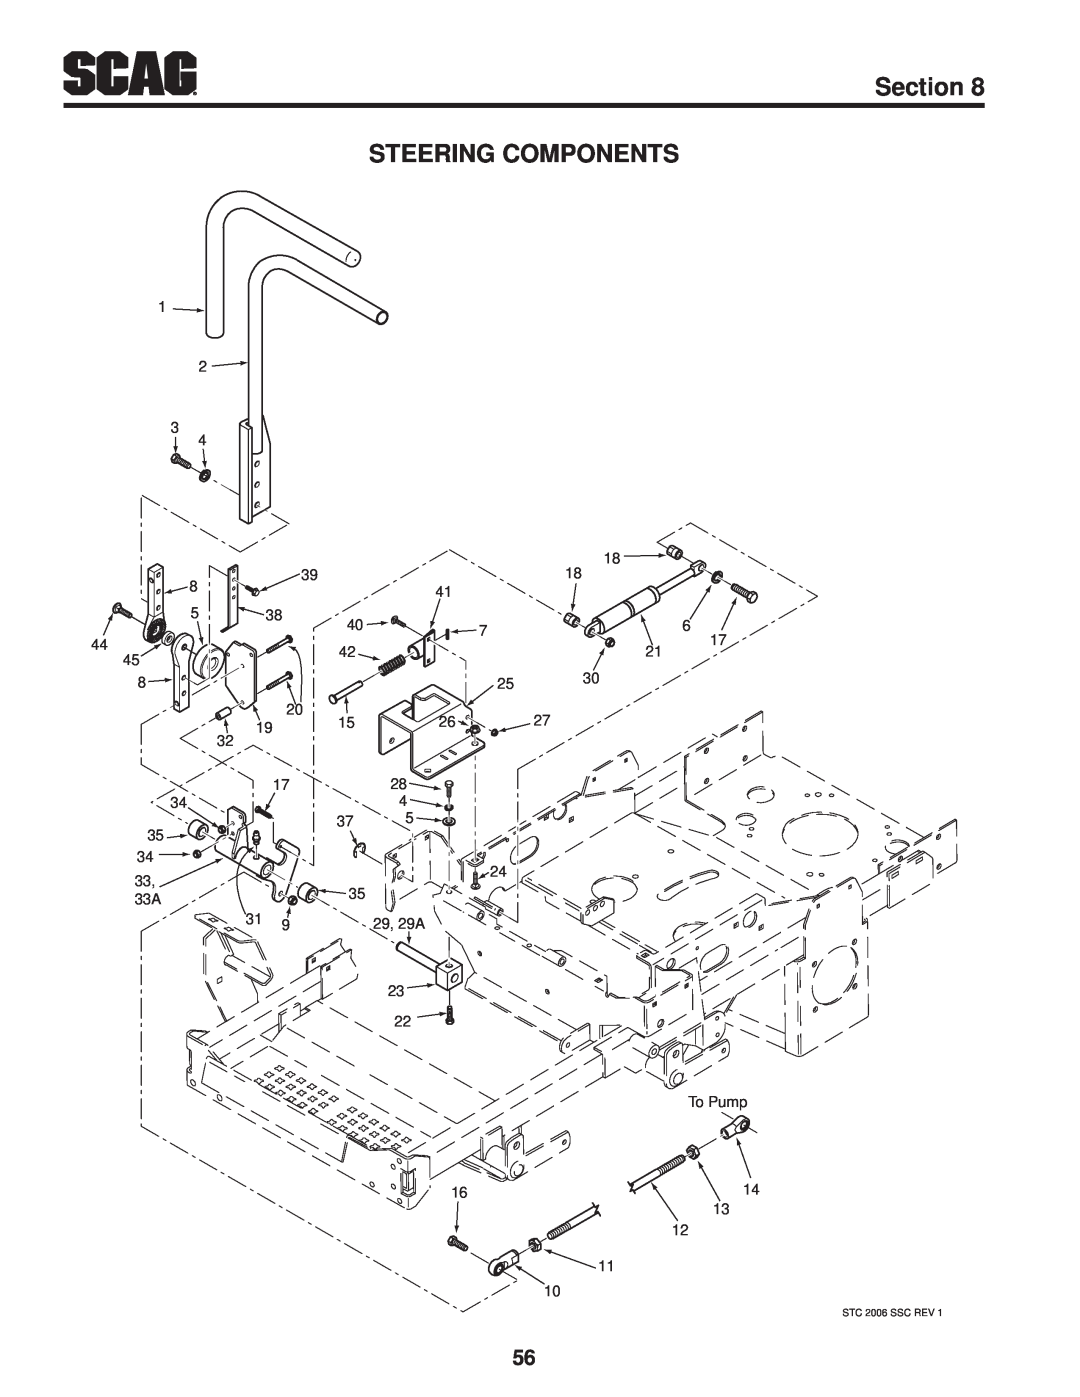 Scag Power Equipment STWC48V-26KA-LC, STWC48V-25CV Steering Components, Section, 29, 29A, To Pump, STC 2006 SSC REV 